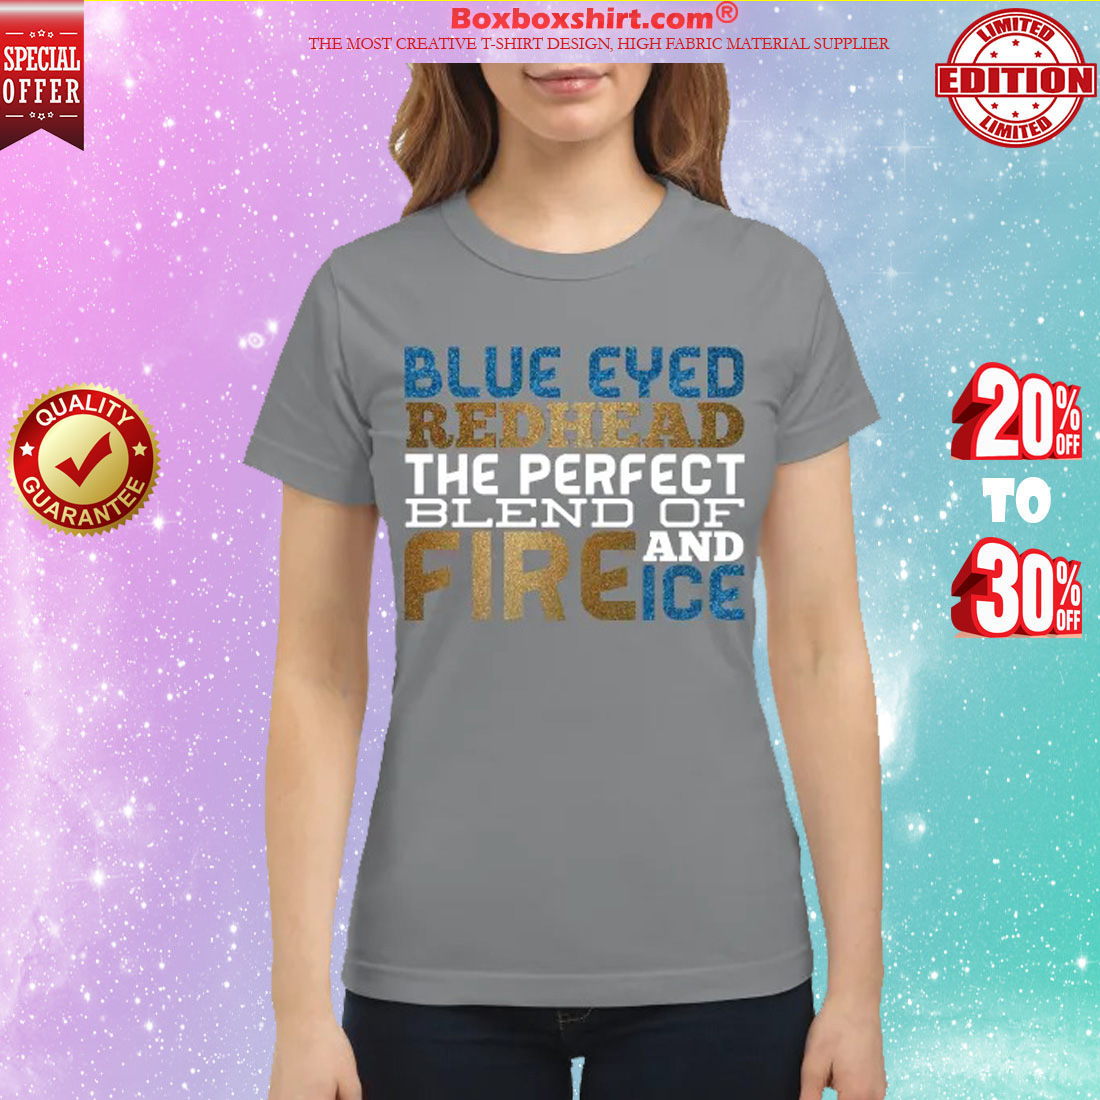 Blue eyed redhead the perfect blend of fire and ice classic shirt